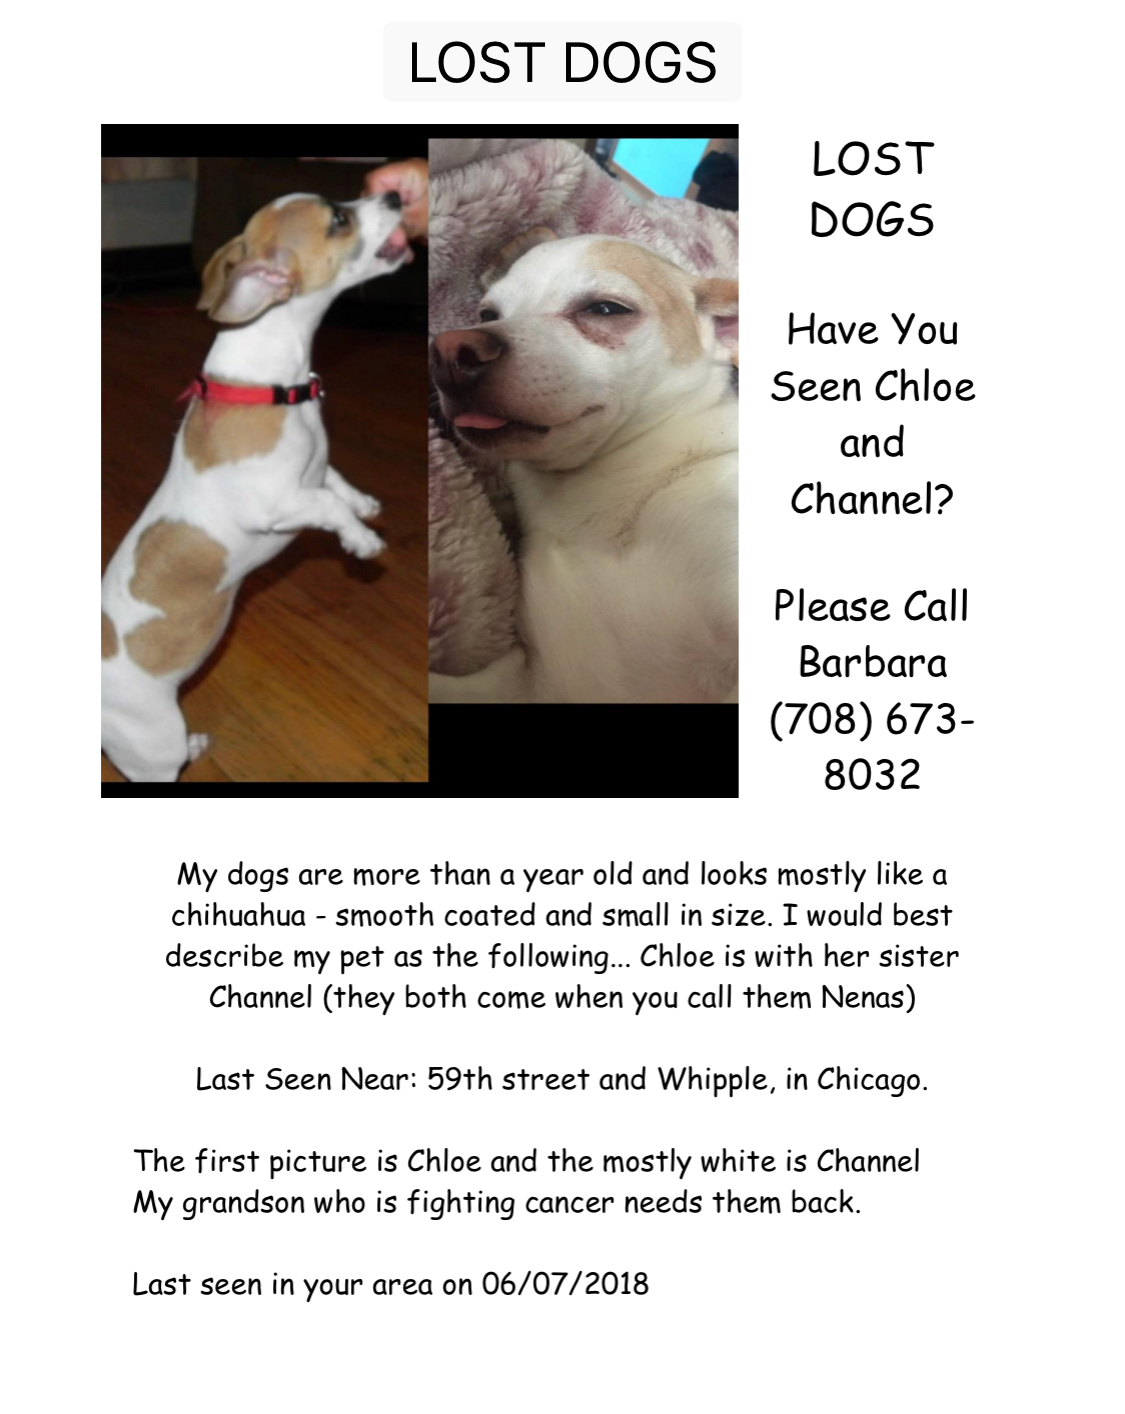 Image of Channel and Chloe, Lost Dog